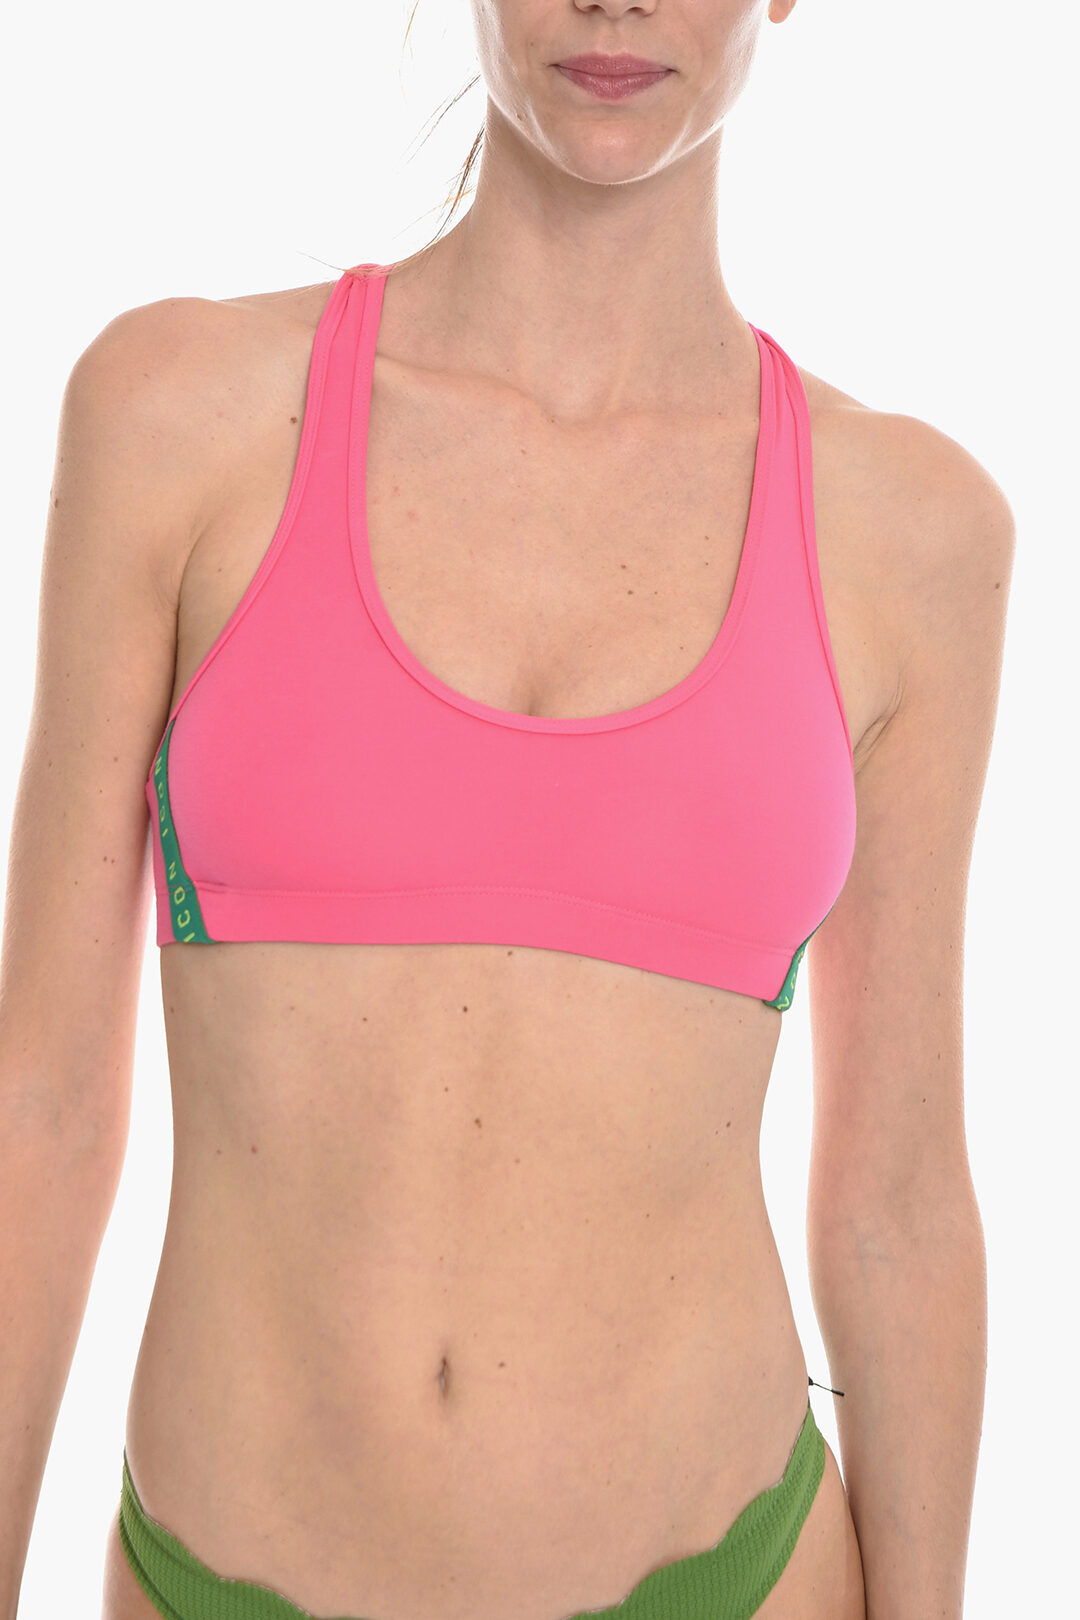 Underwire See-Through Bra with Contrasting Edges